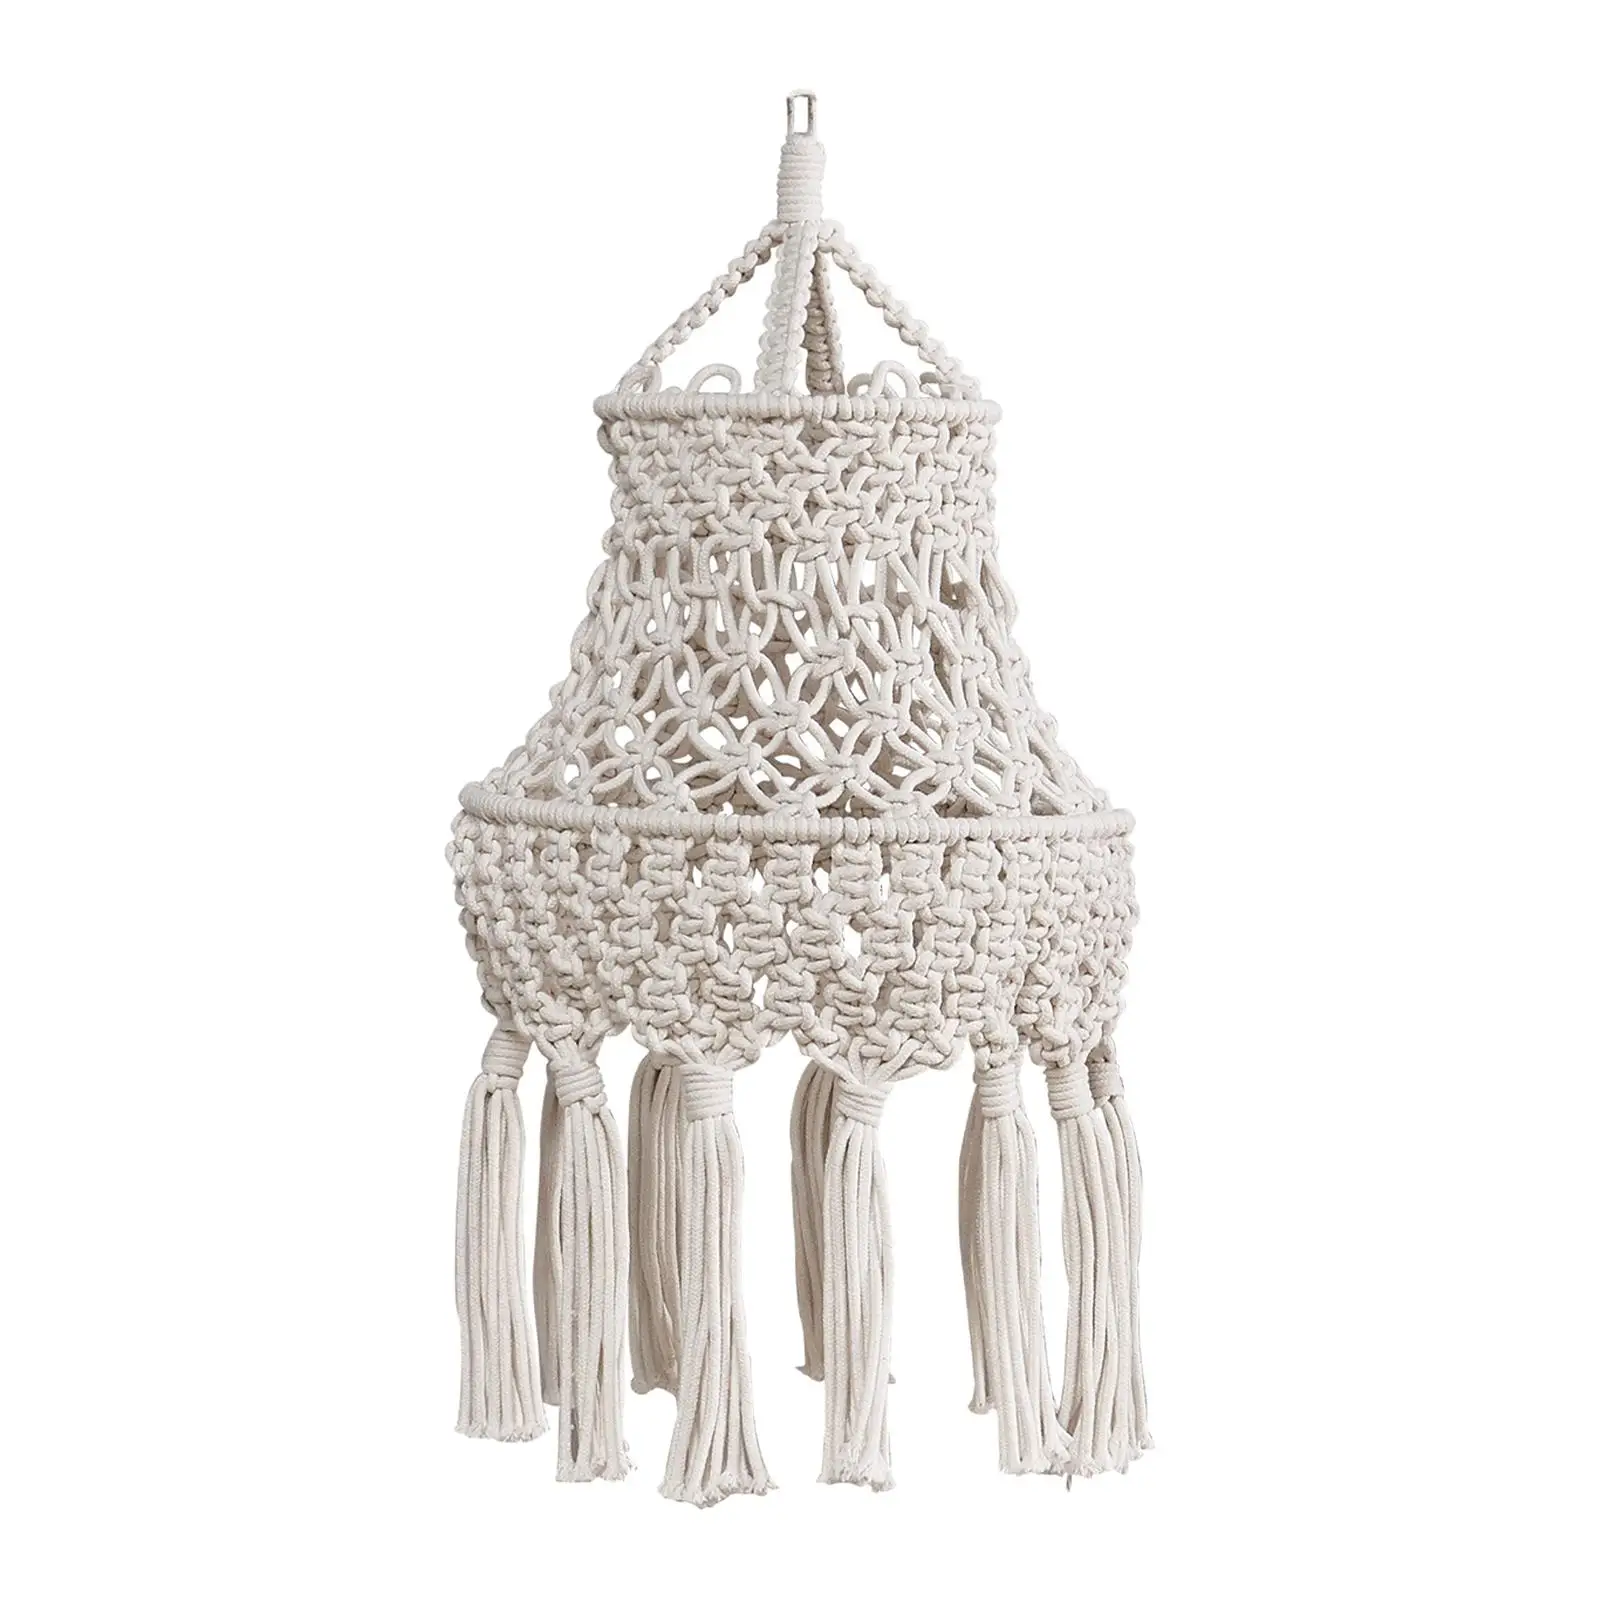 Handmade Macrame Lamp Shade Chandelier Lampshade Bohemian Hanging Light cover Cover for Nursery Hotel Wedding Decoration